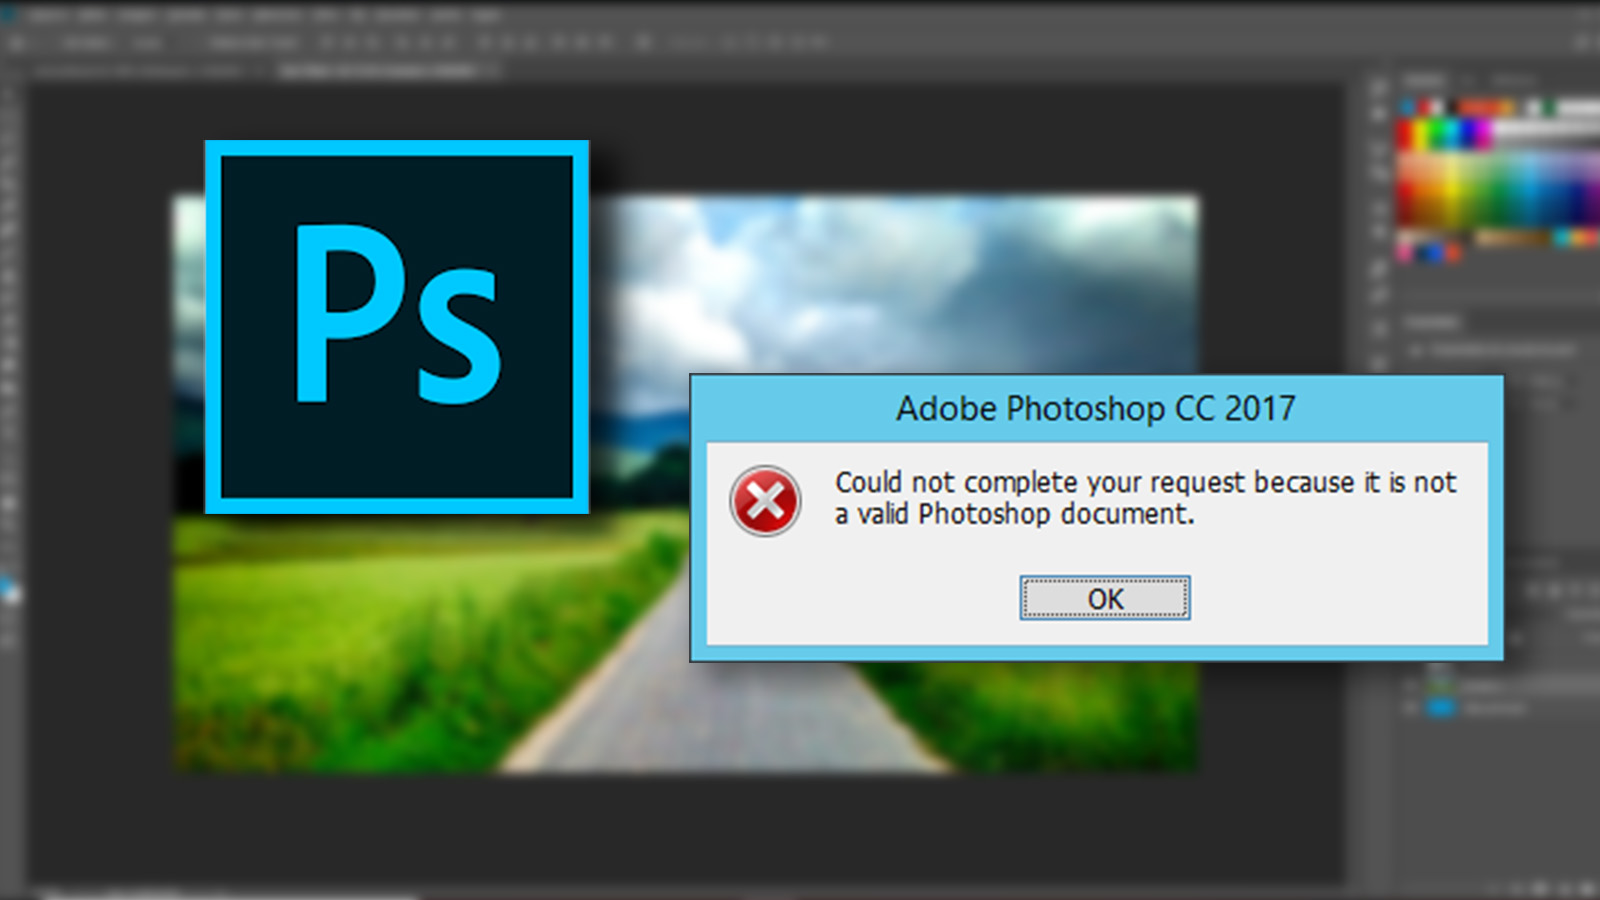 Learn how to restore a corrupted Photoshop file in up to 5 steps